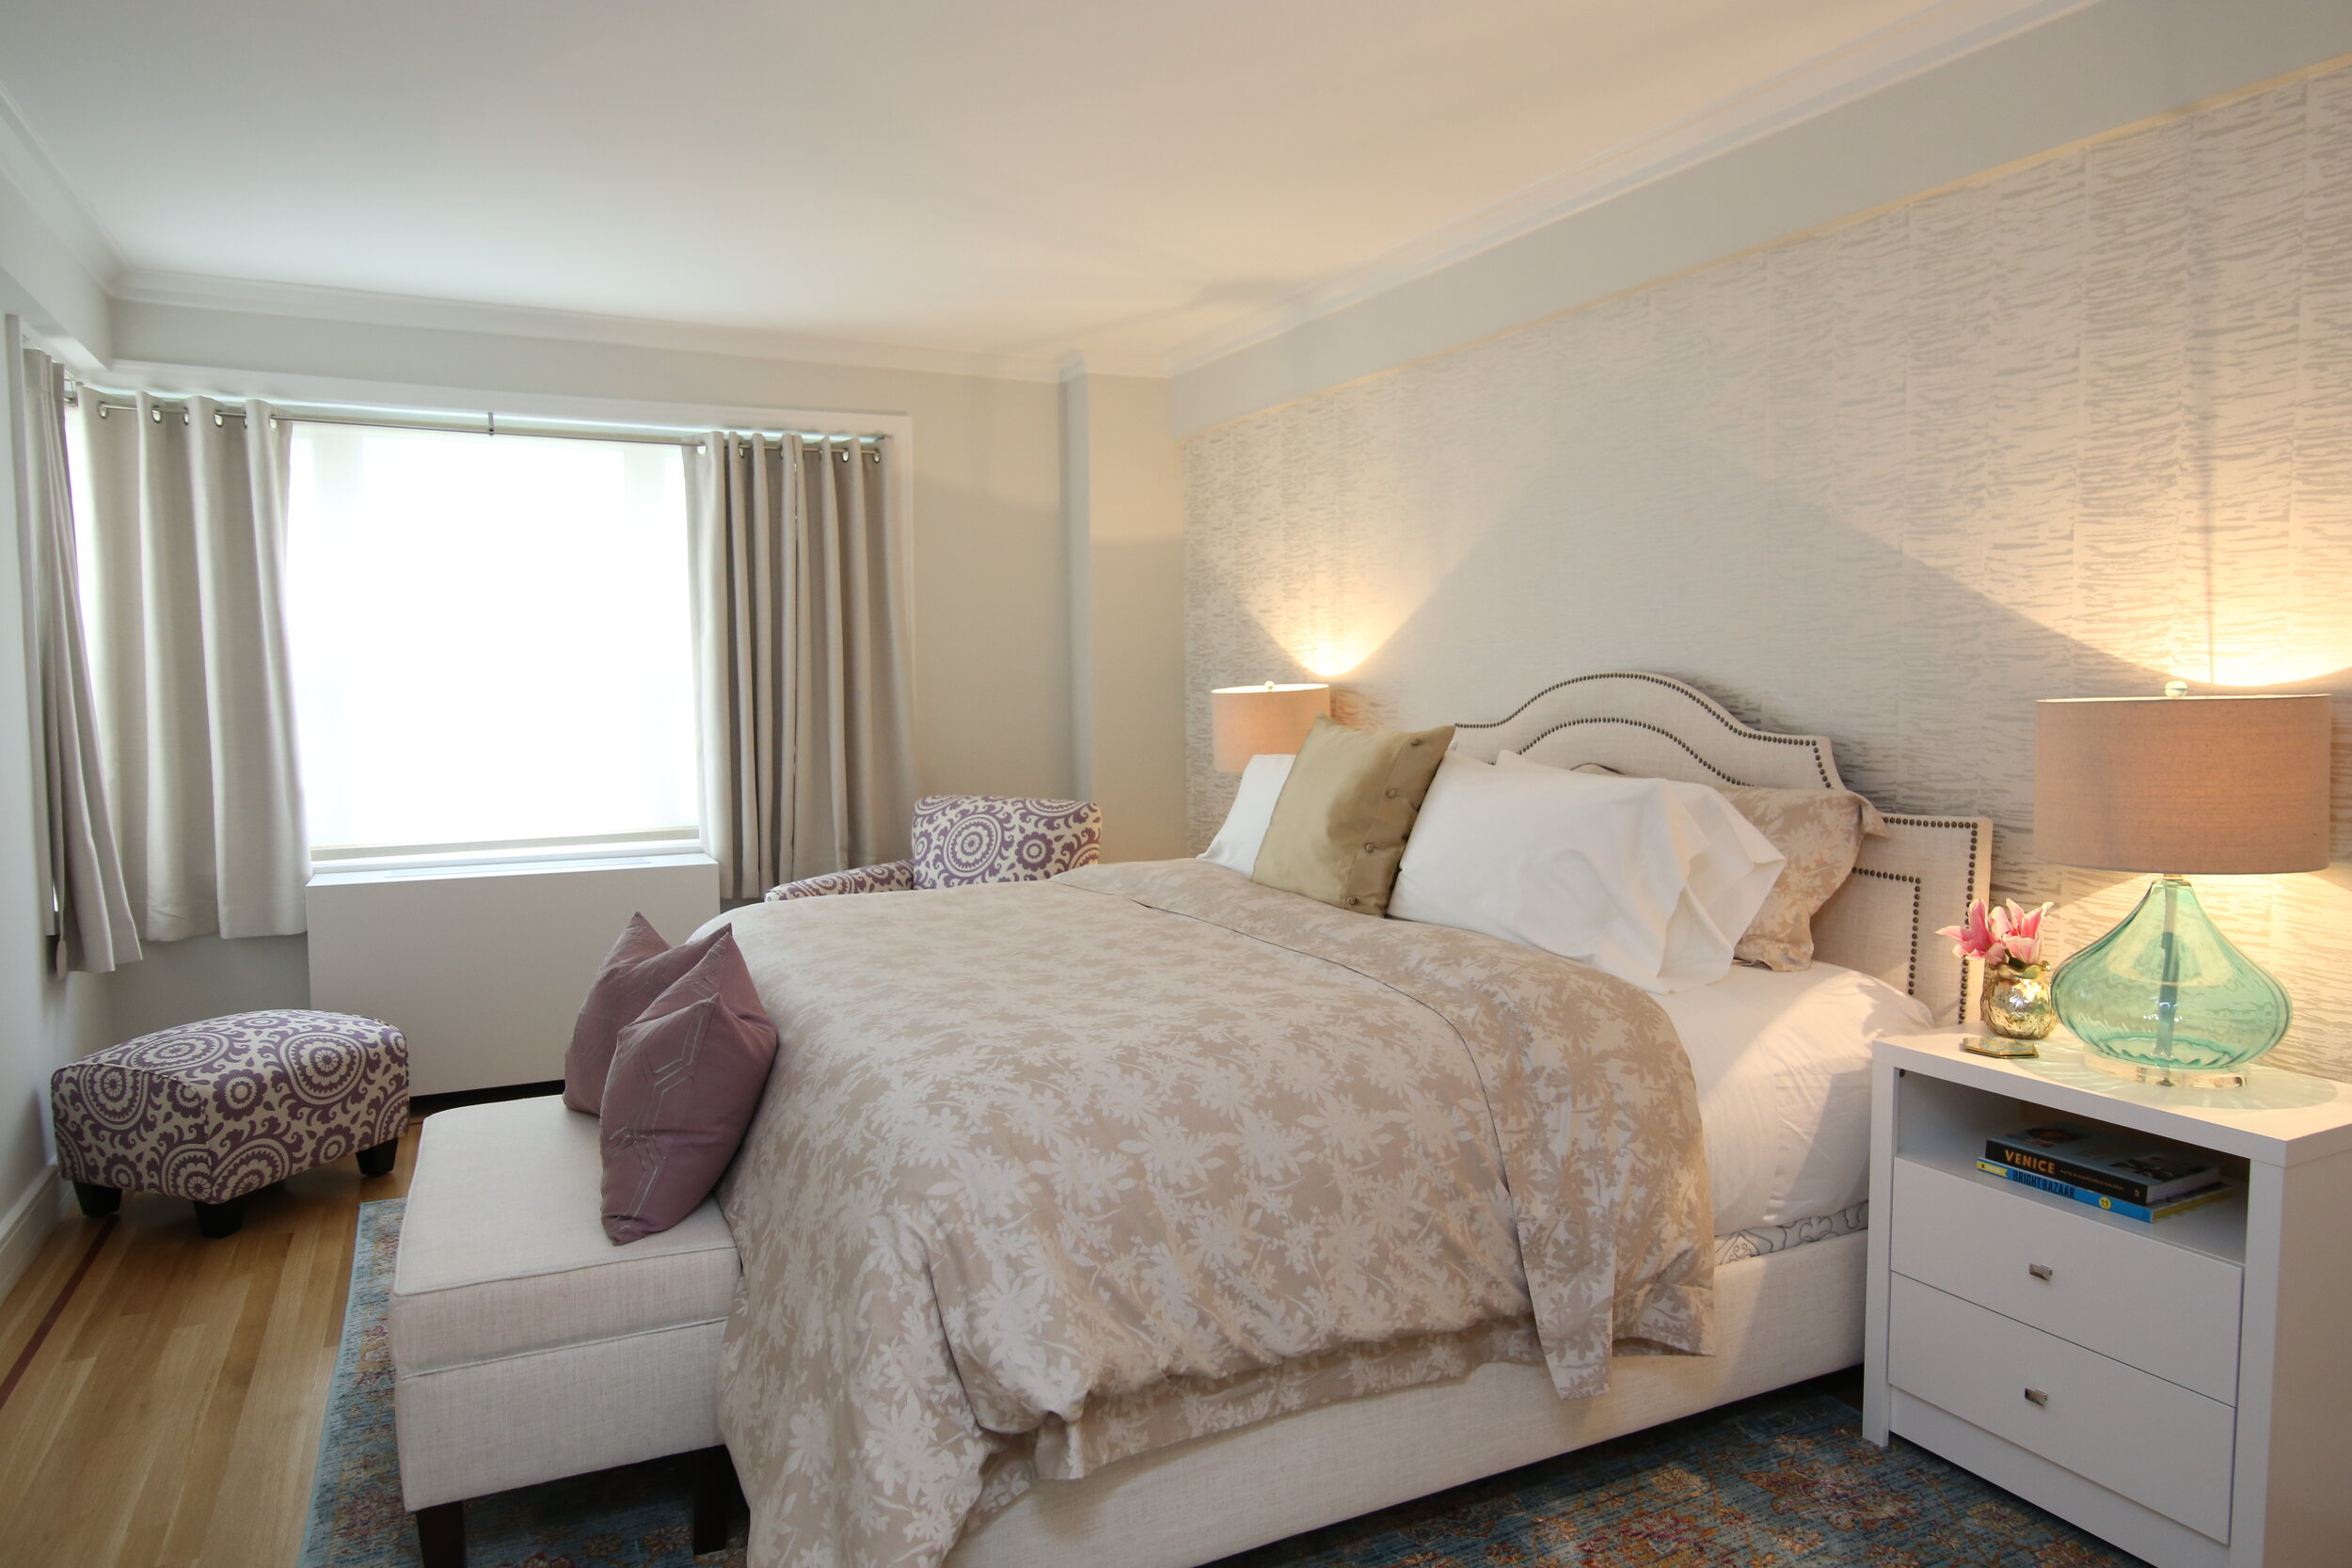 Upper east side master bedroom with luxurious linens and textured wallpaper 